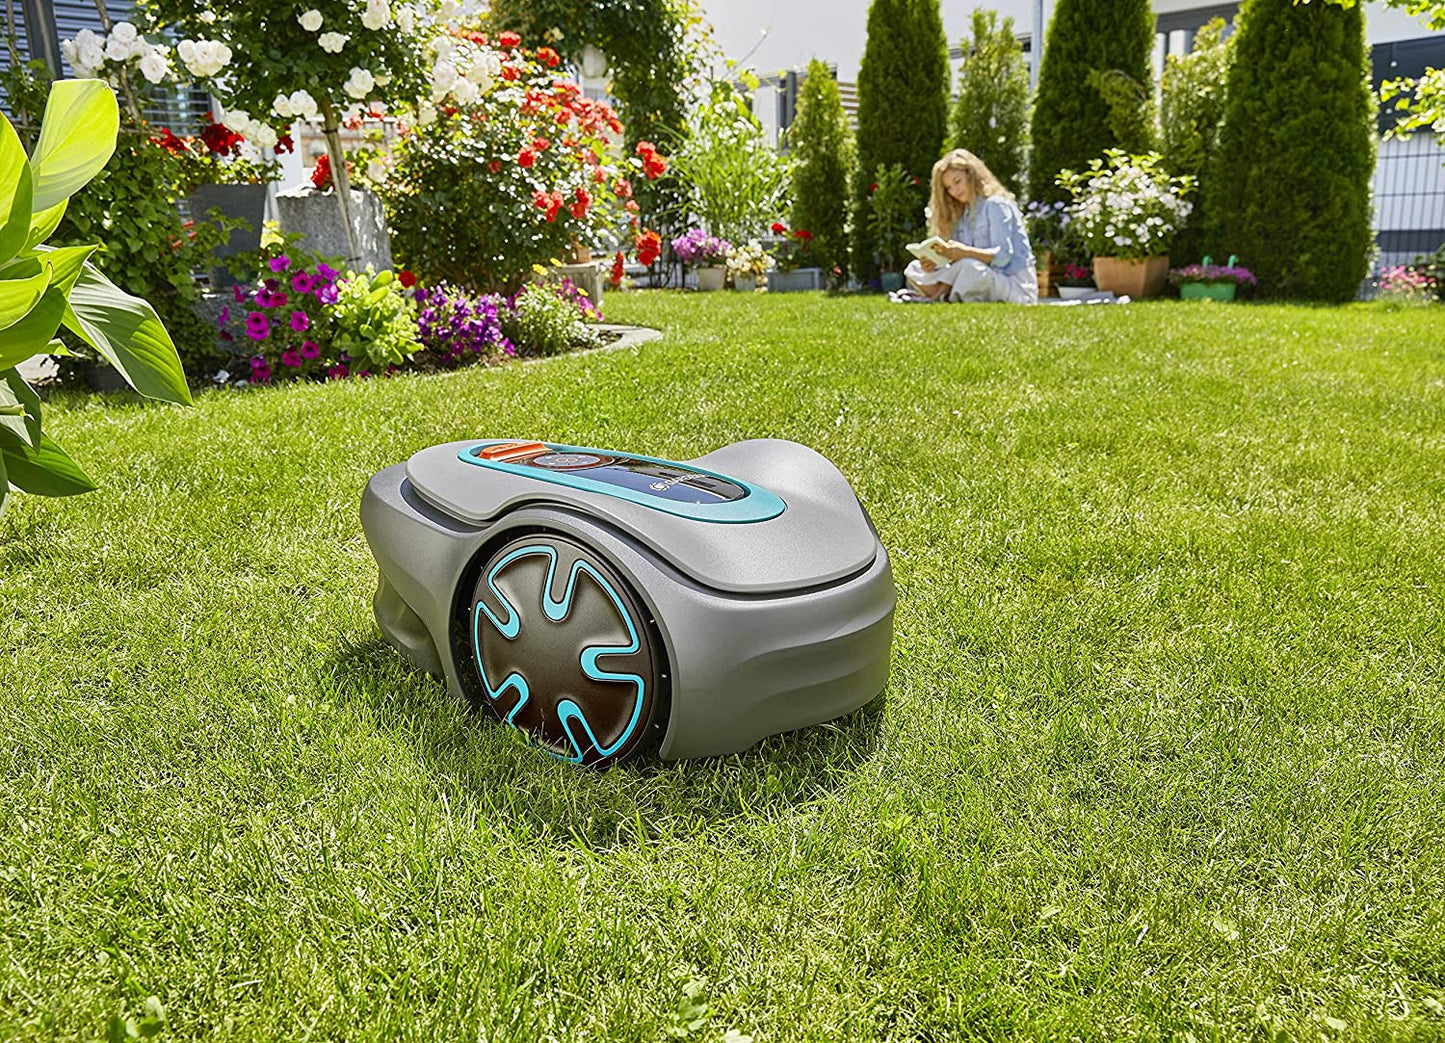 A robotic lawn mover on a green lawn with a woman reading a book in the background.